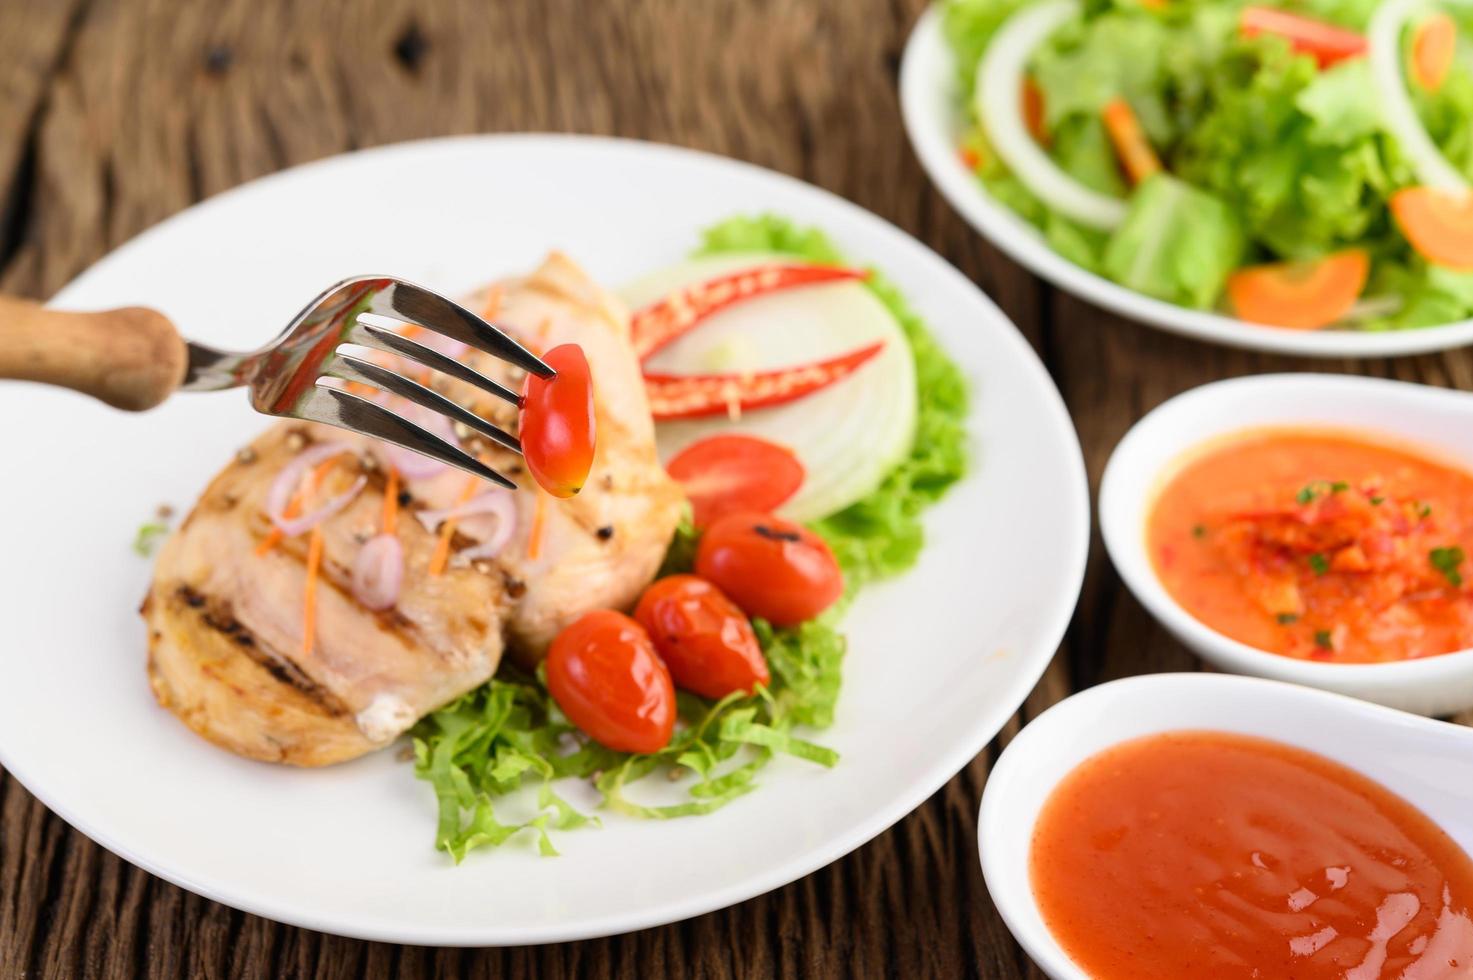 Grilled chicken with salad photo